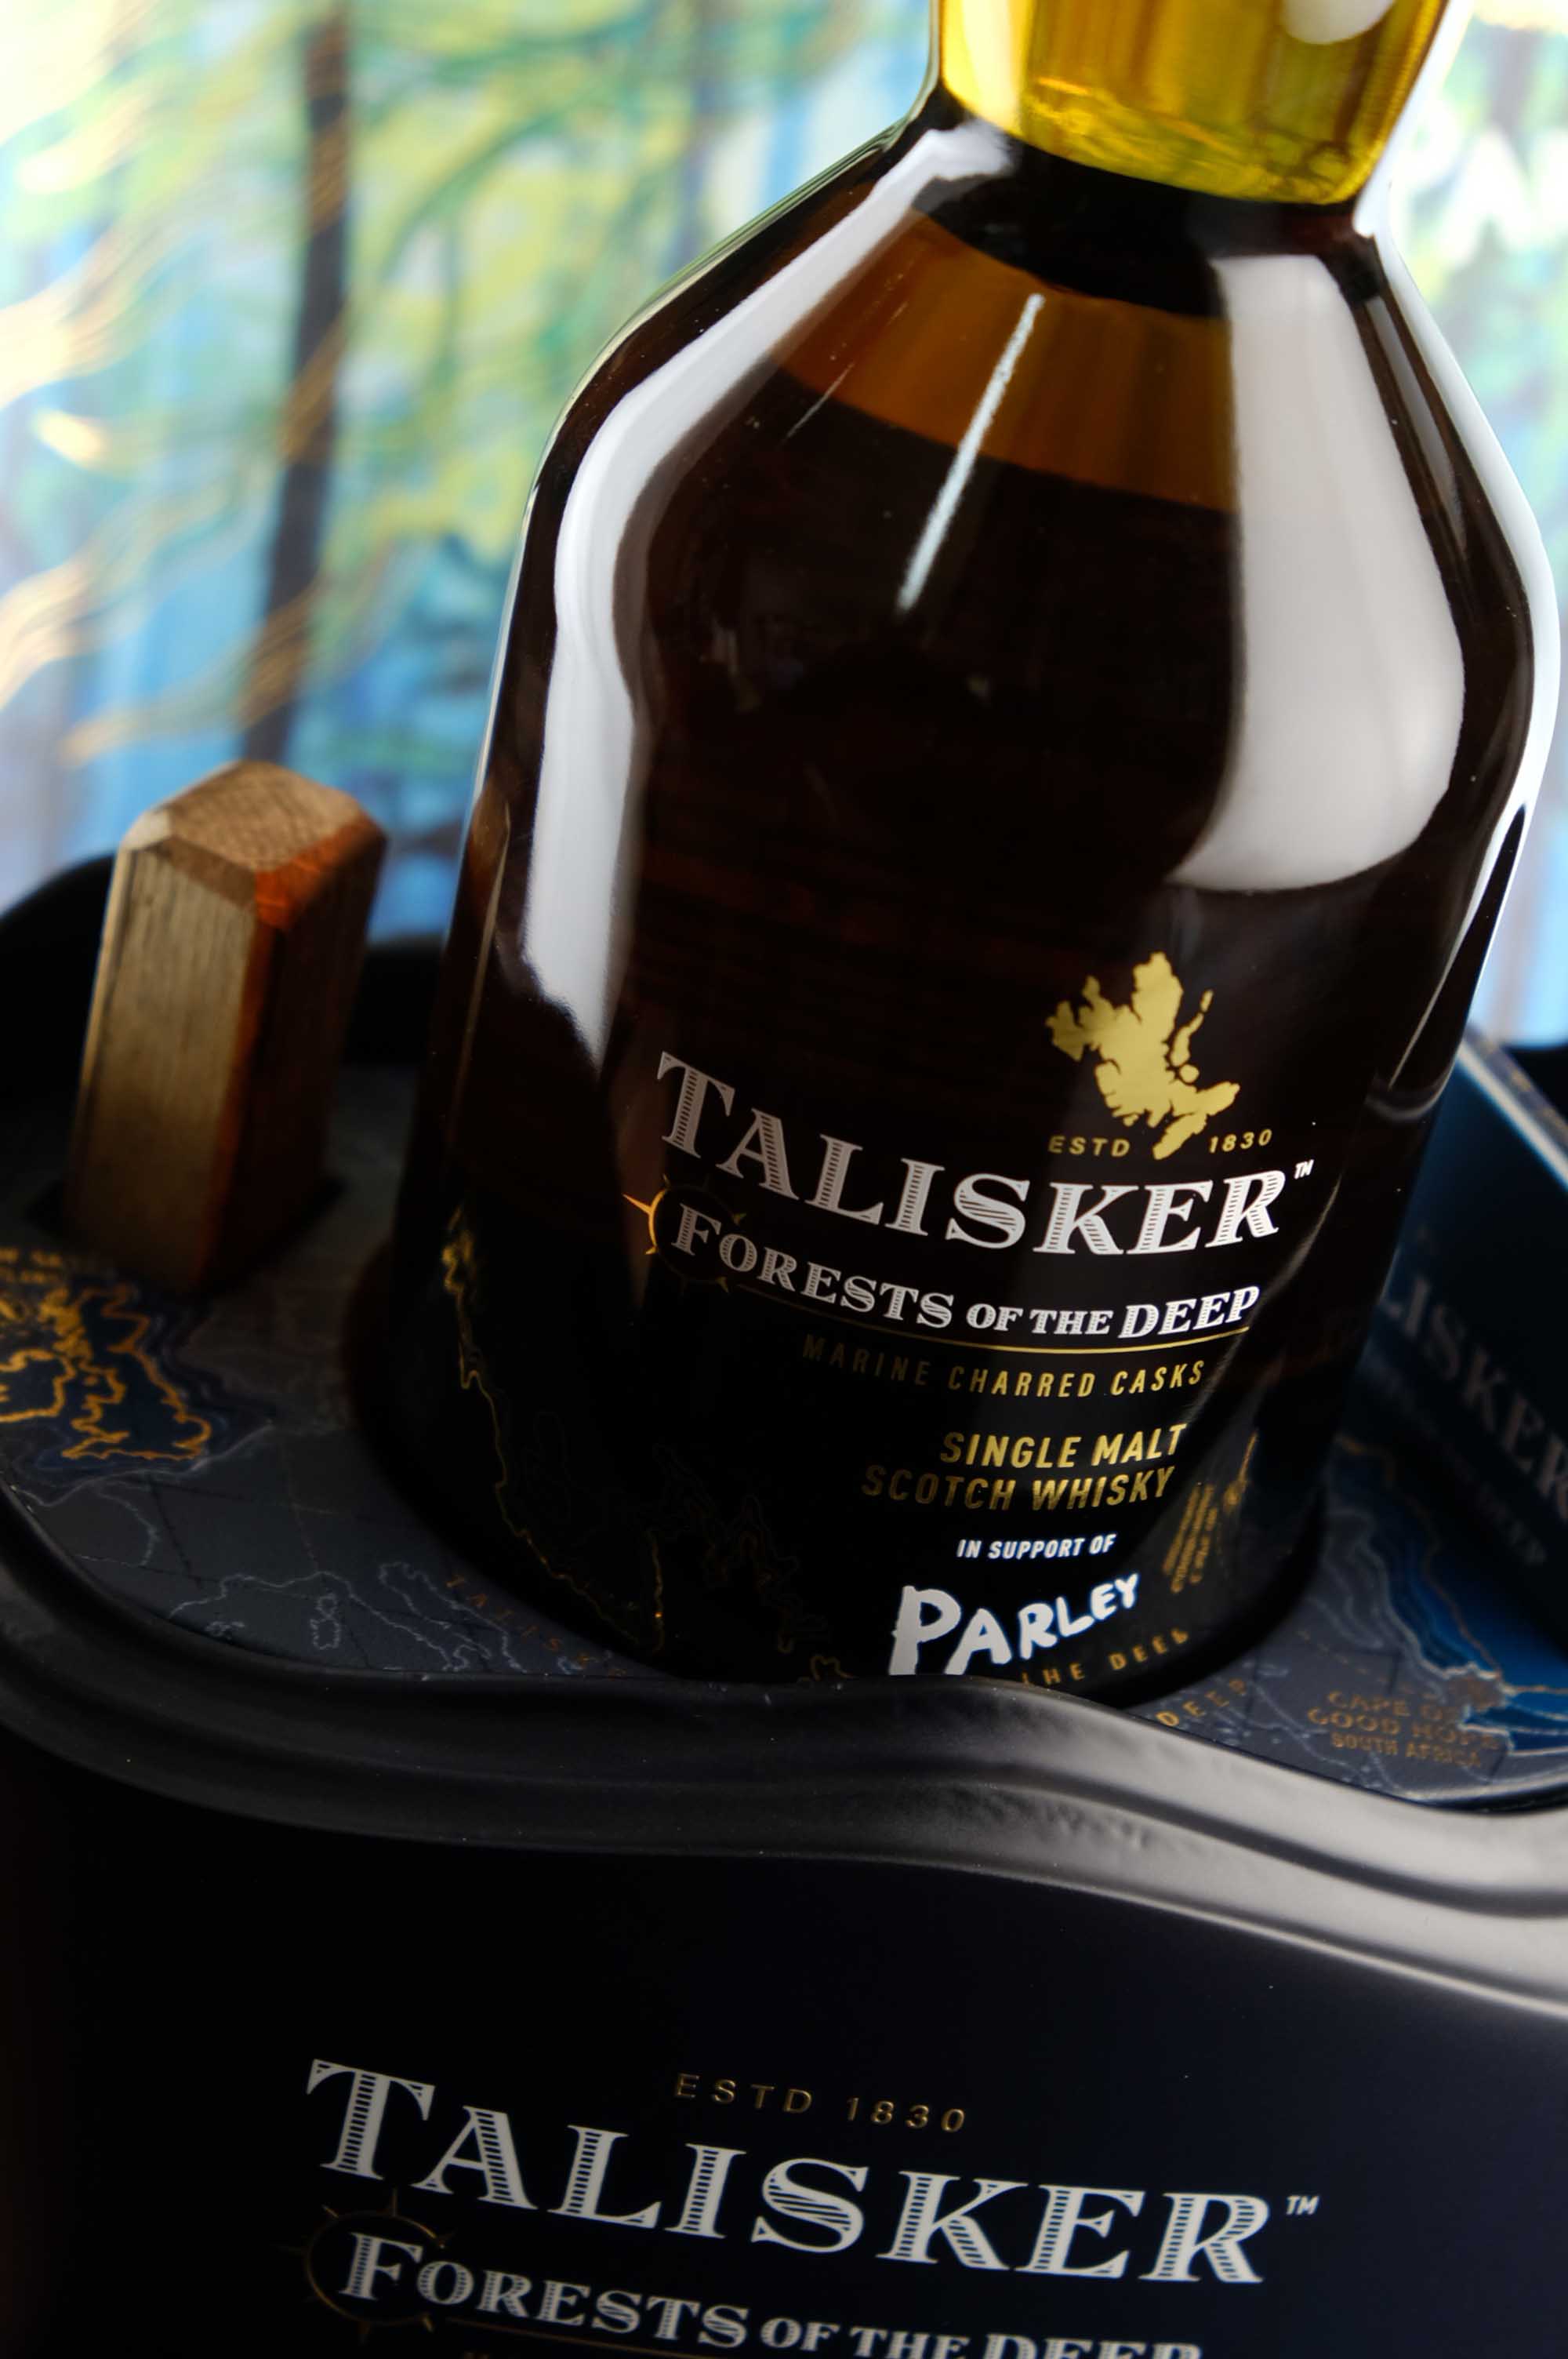 Talisker 44 Year Old Forests Of The Deep